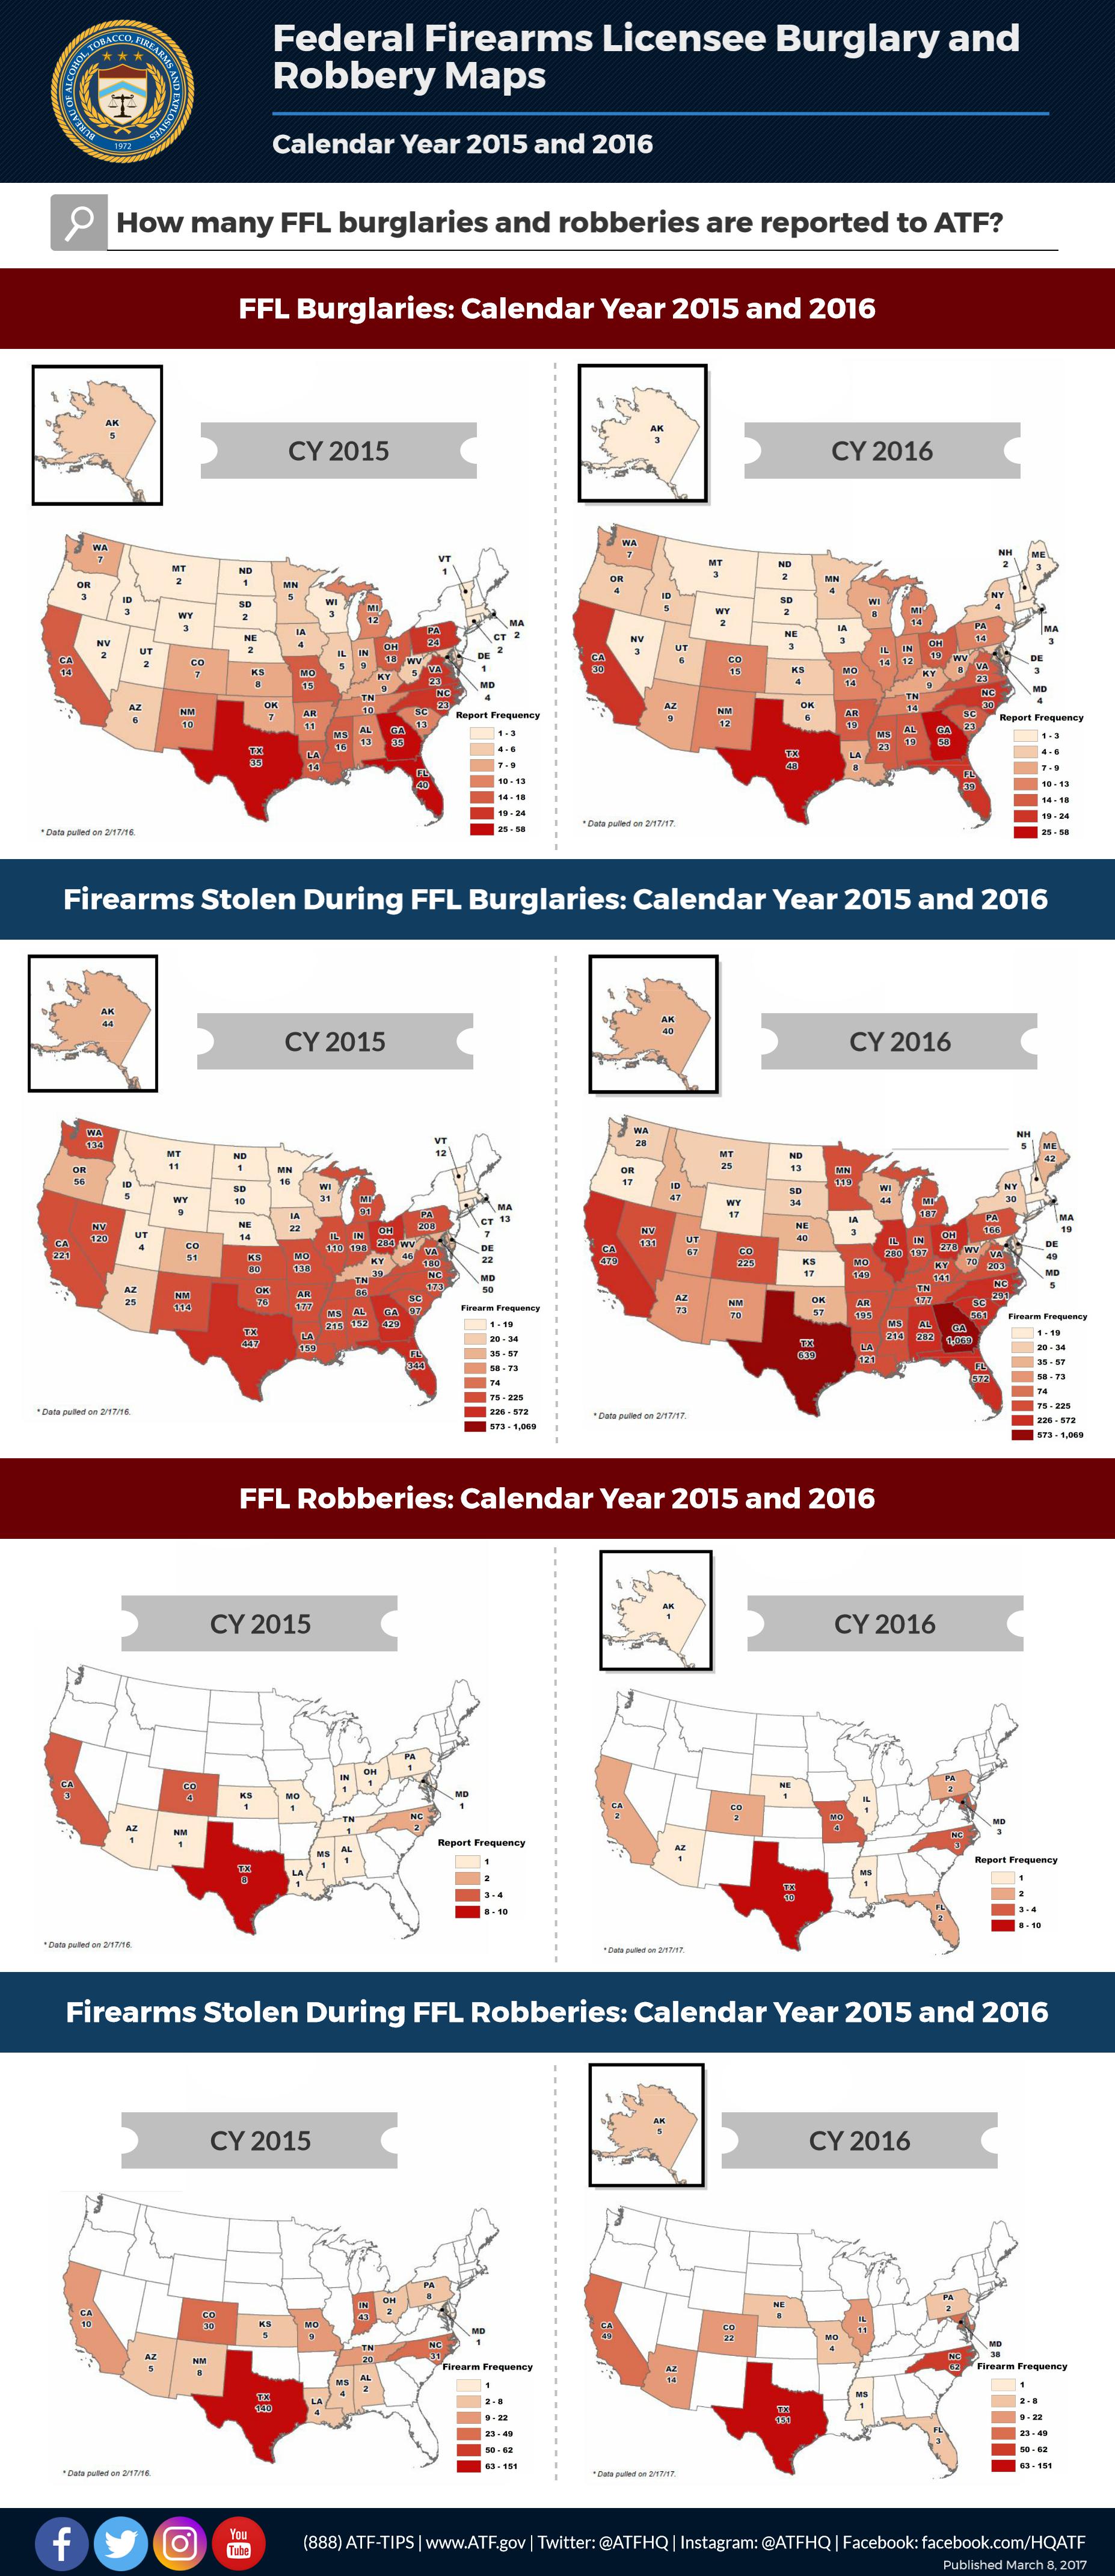 Federal Firearms Licensee (FFL) Burglary and Robbery Maps for Calendar Years 2015 & 2016